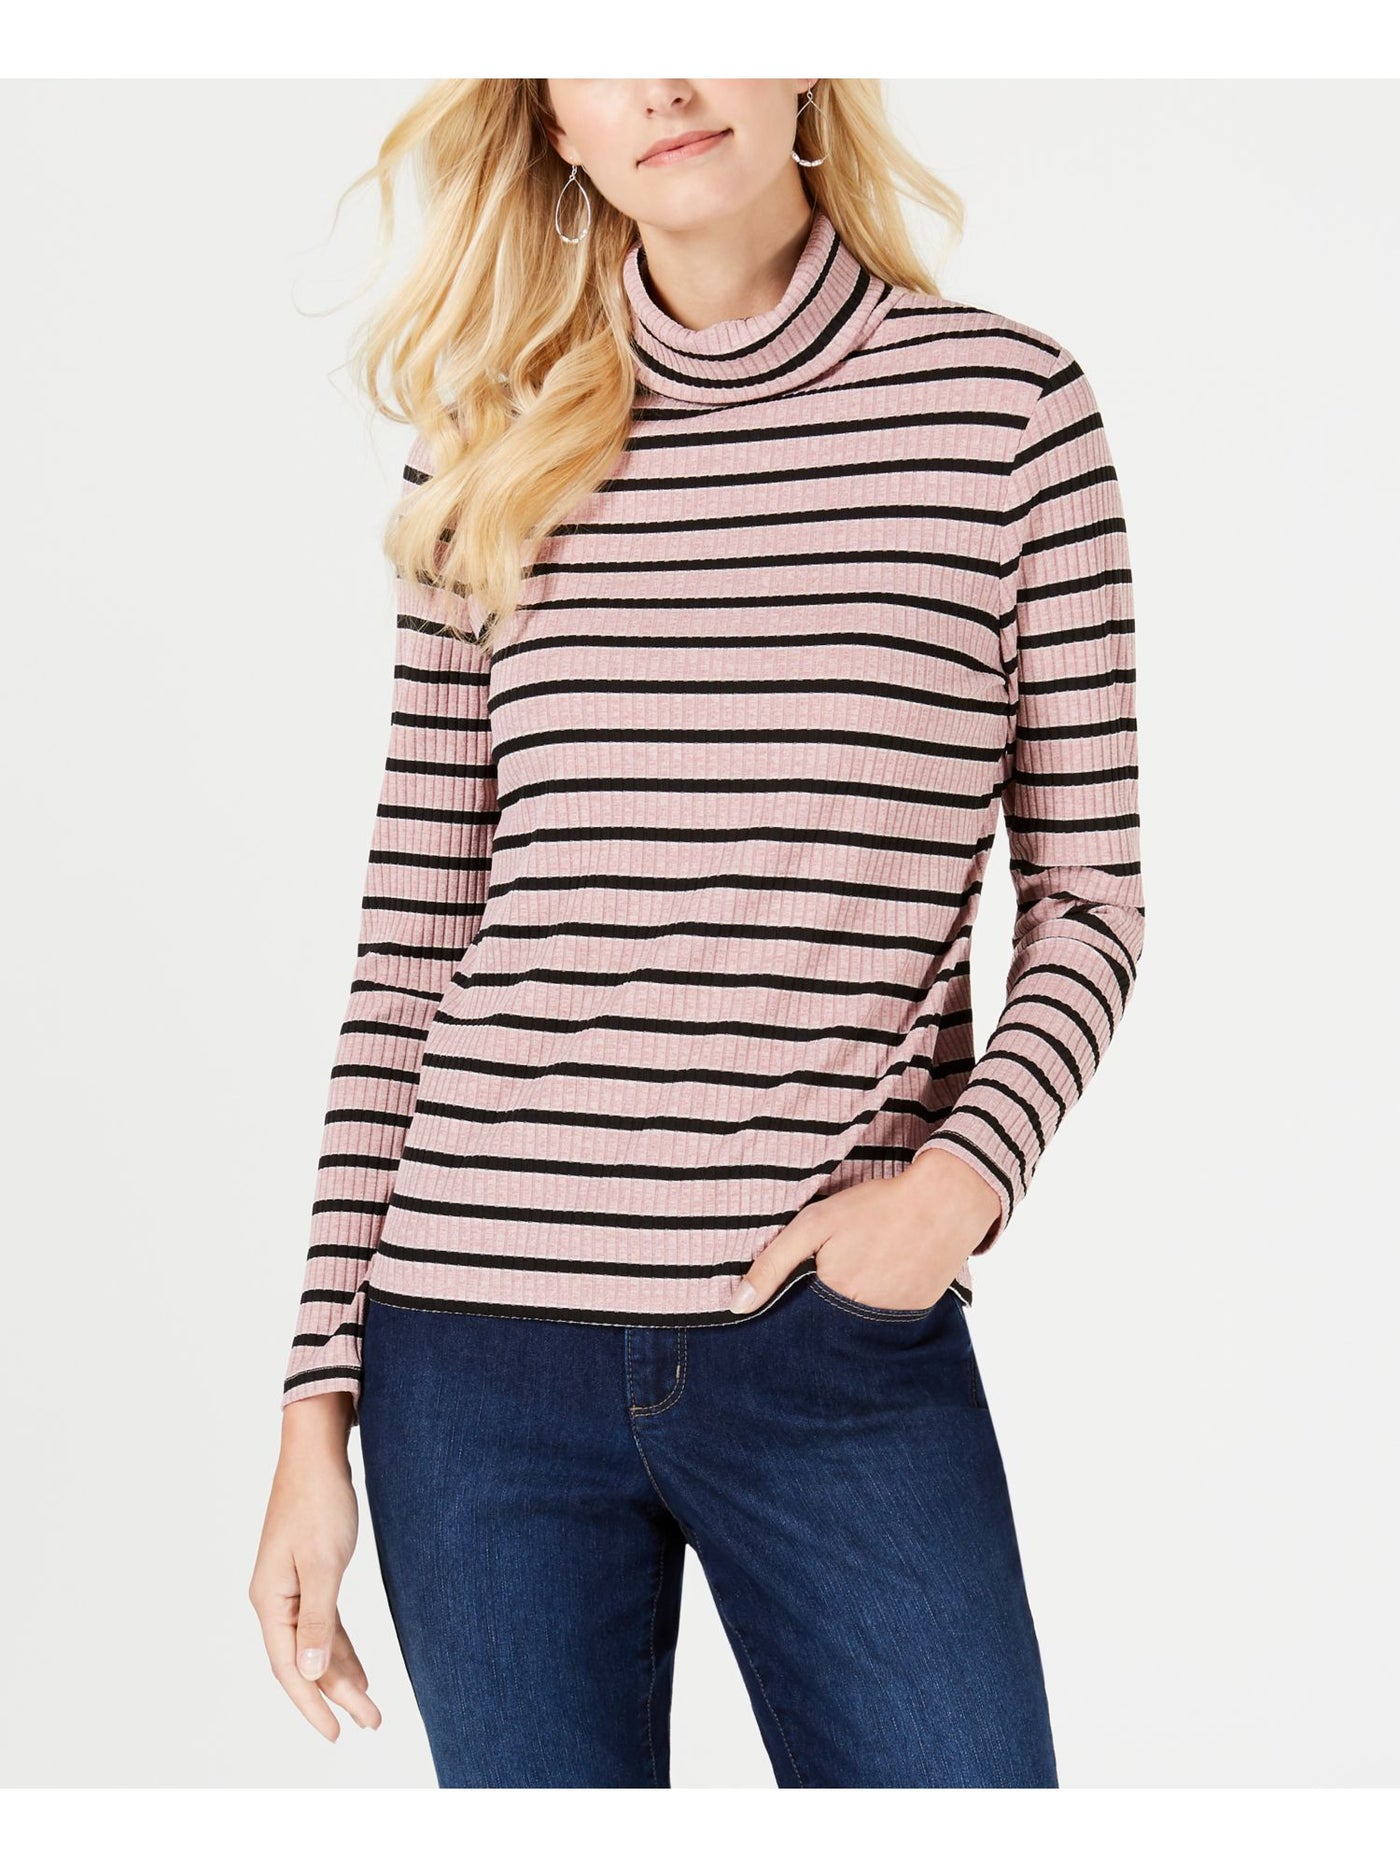 CHARTER CLUB Womens Pink Striped Long Sleeve Turtle Neck Top PXL